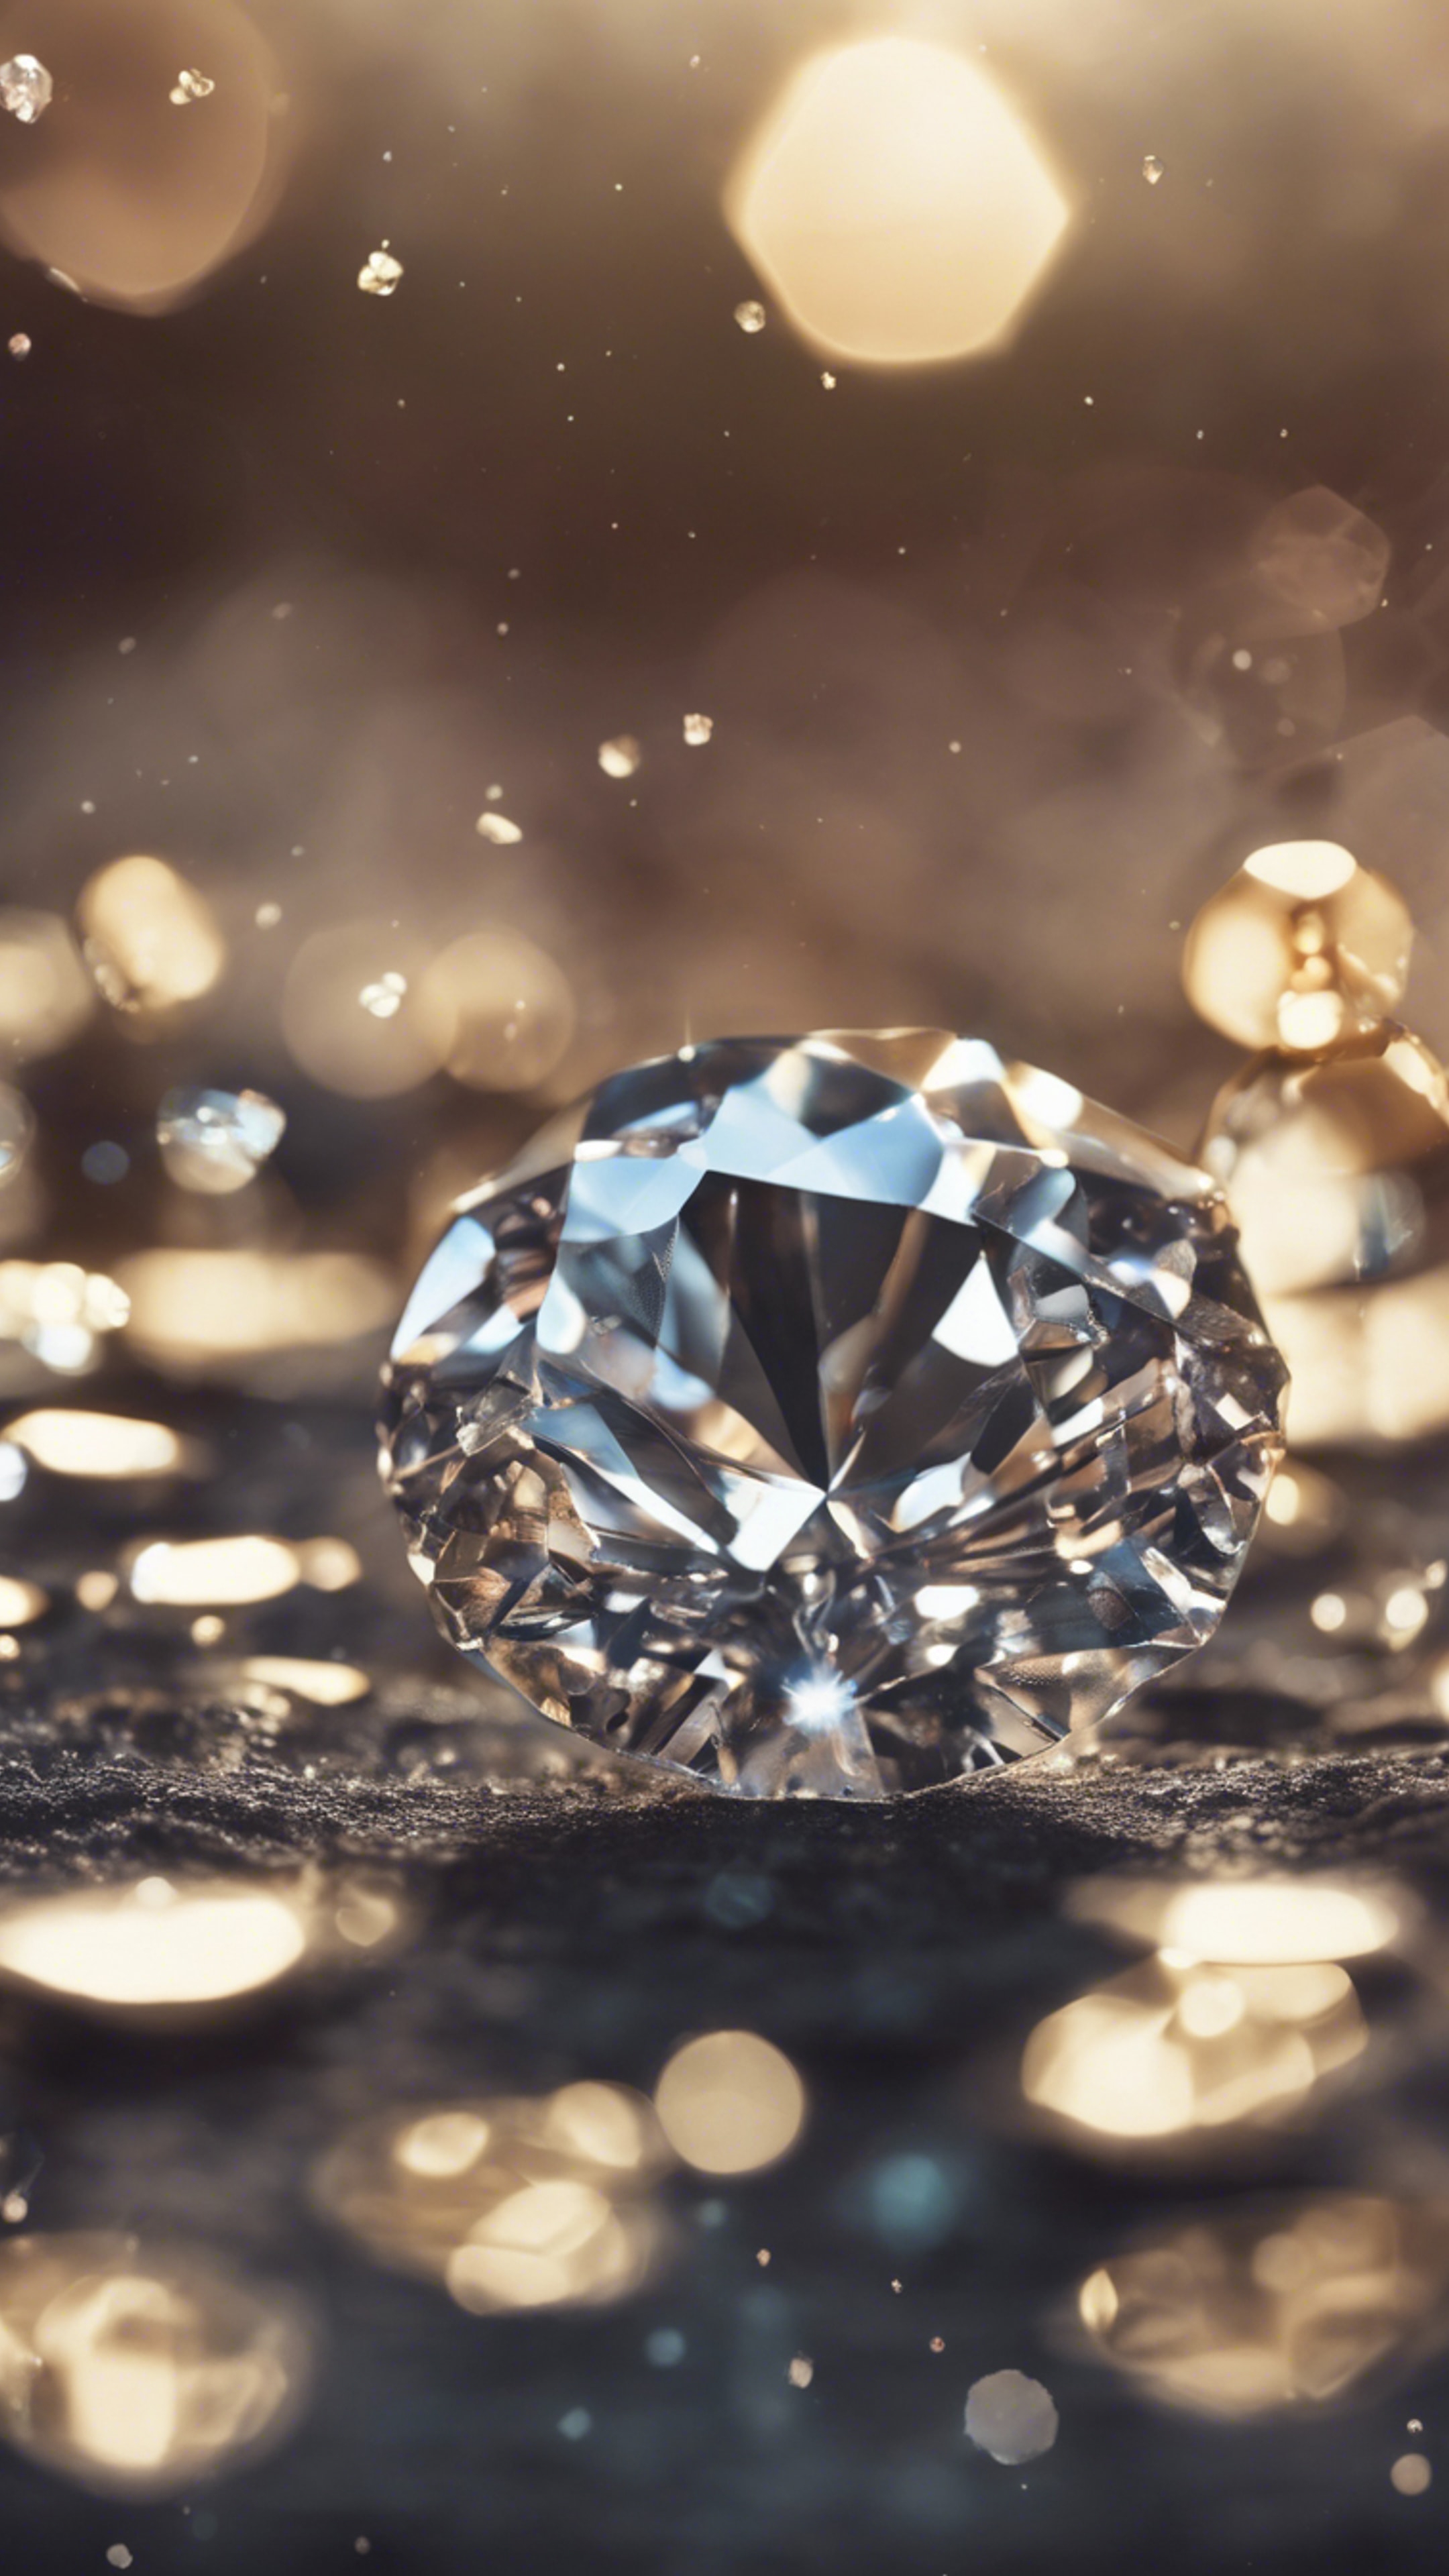 In the face of adversity, remember that diamonds are made under pressure and so are you. Hintergrund[2323702b52984c91b15b]